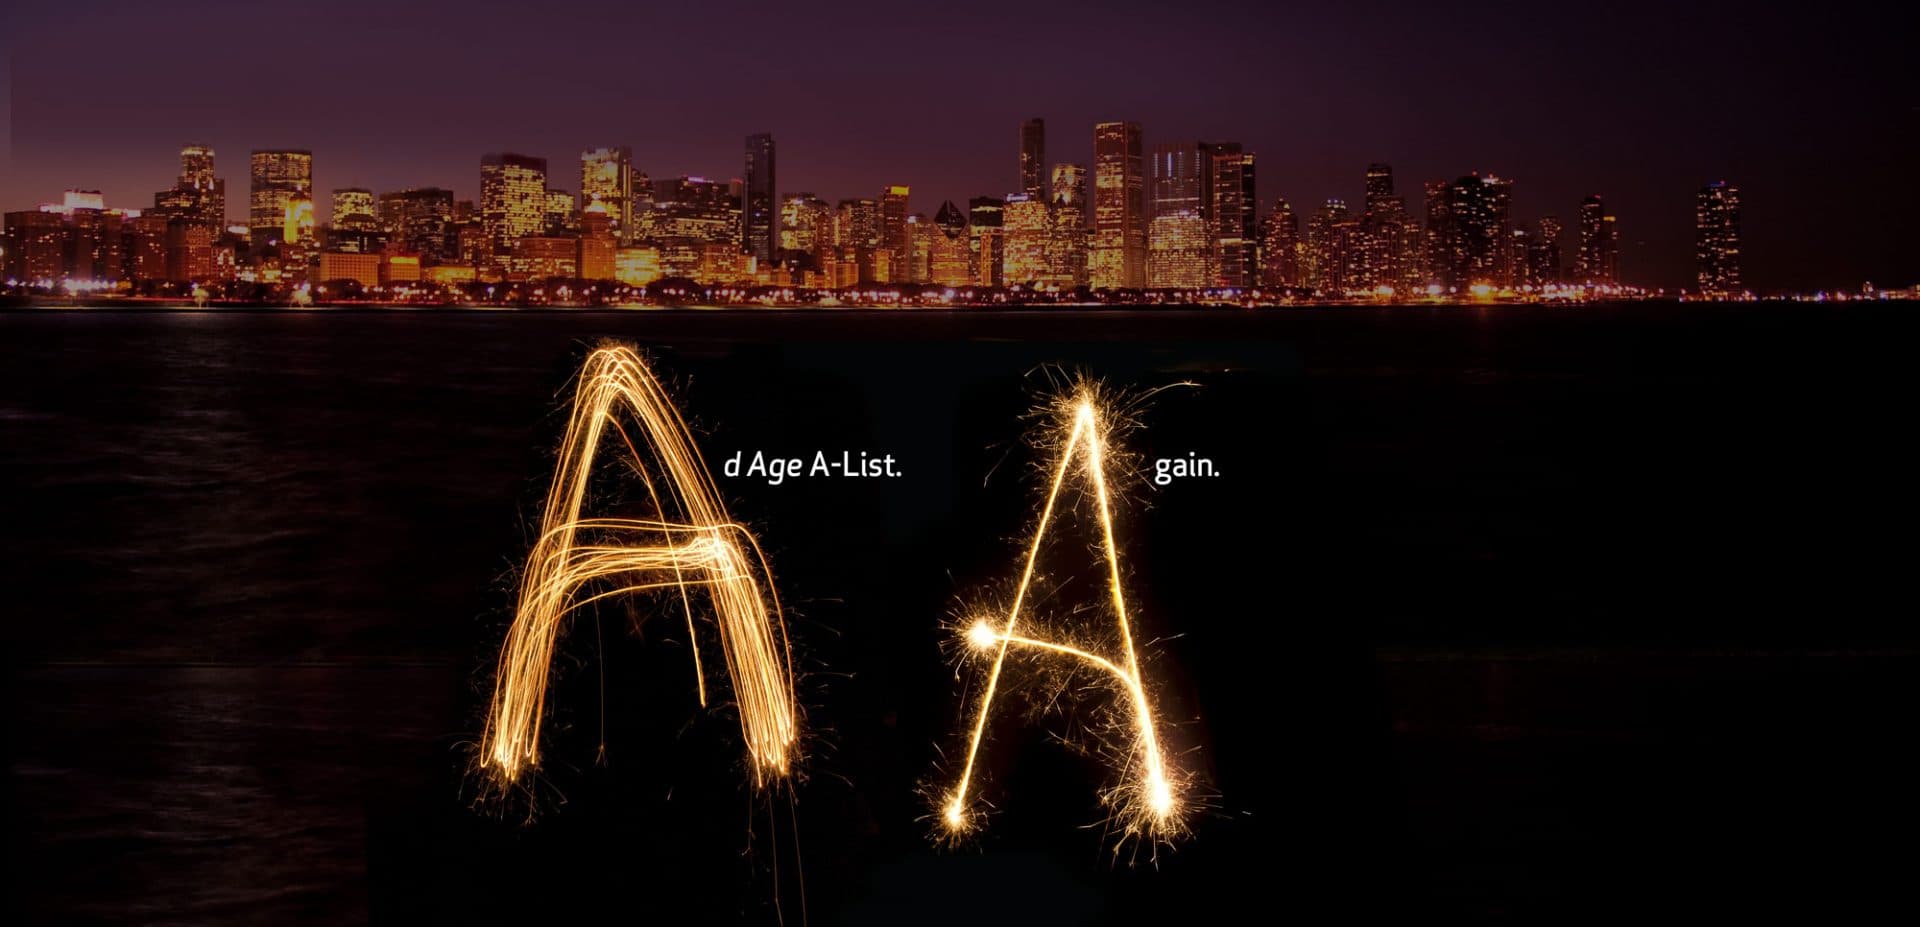 Weber Shandwick Named to Advertising Age’s 2015 Agency A-List